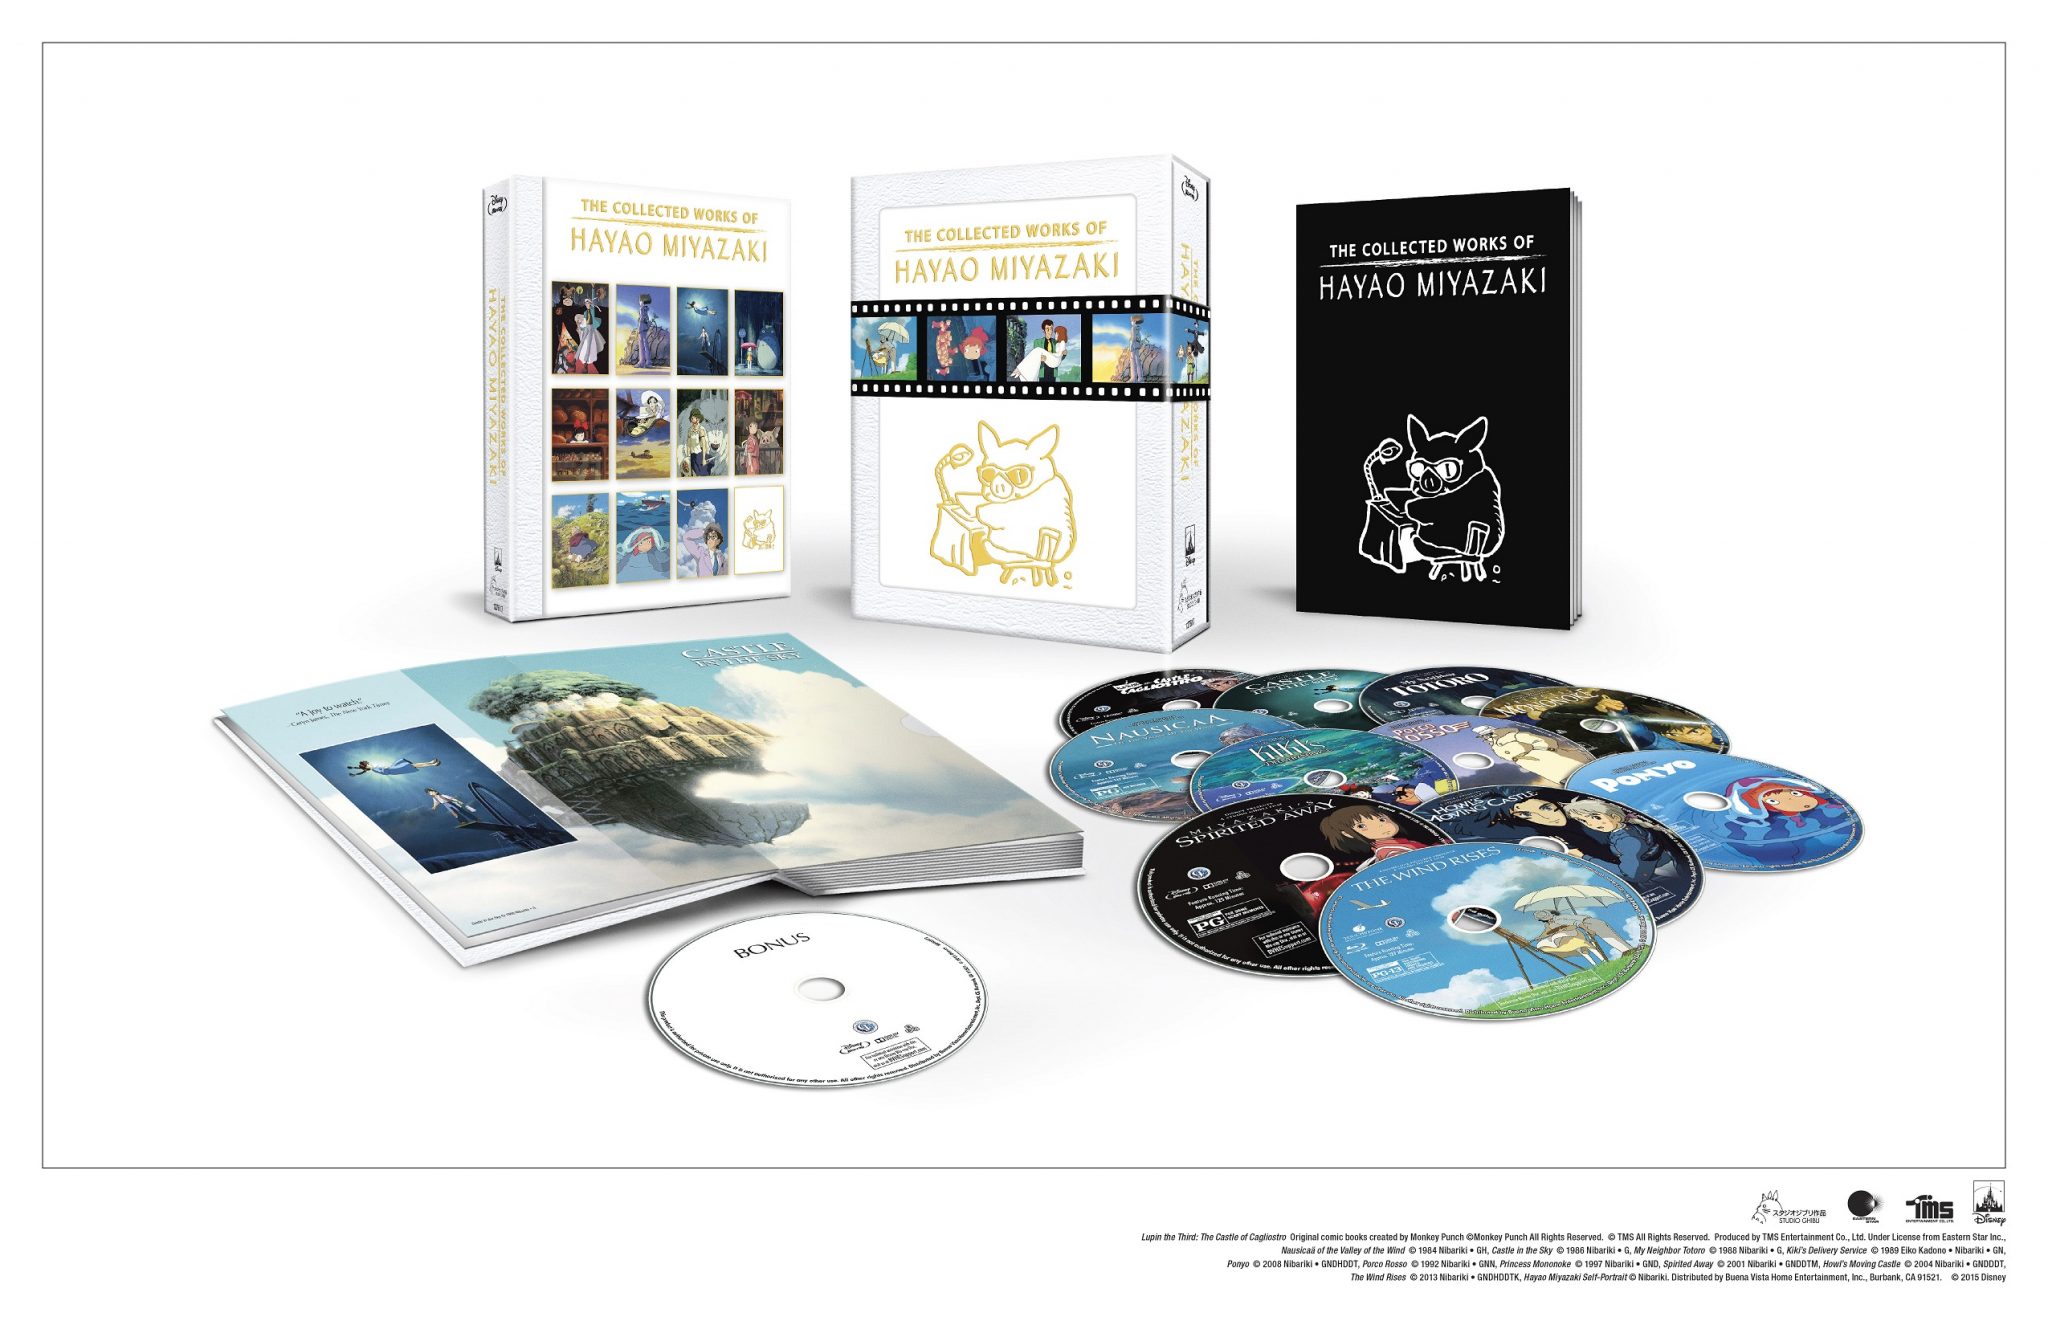 Disney to Release ‘The Collected Works Of Hayao Miyazaki’ 11/17